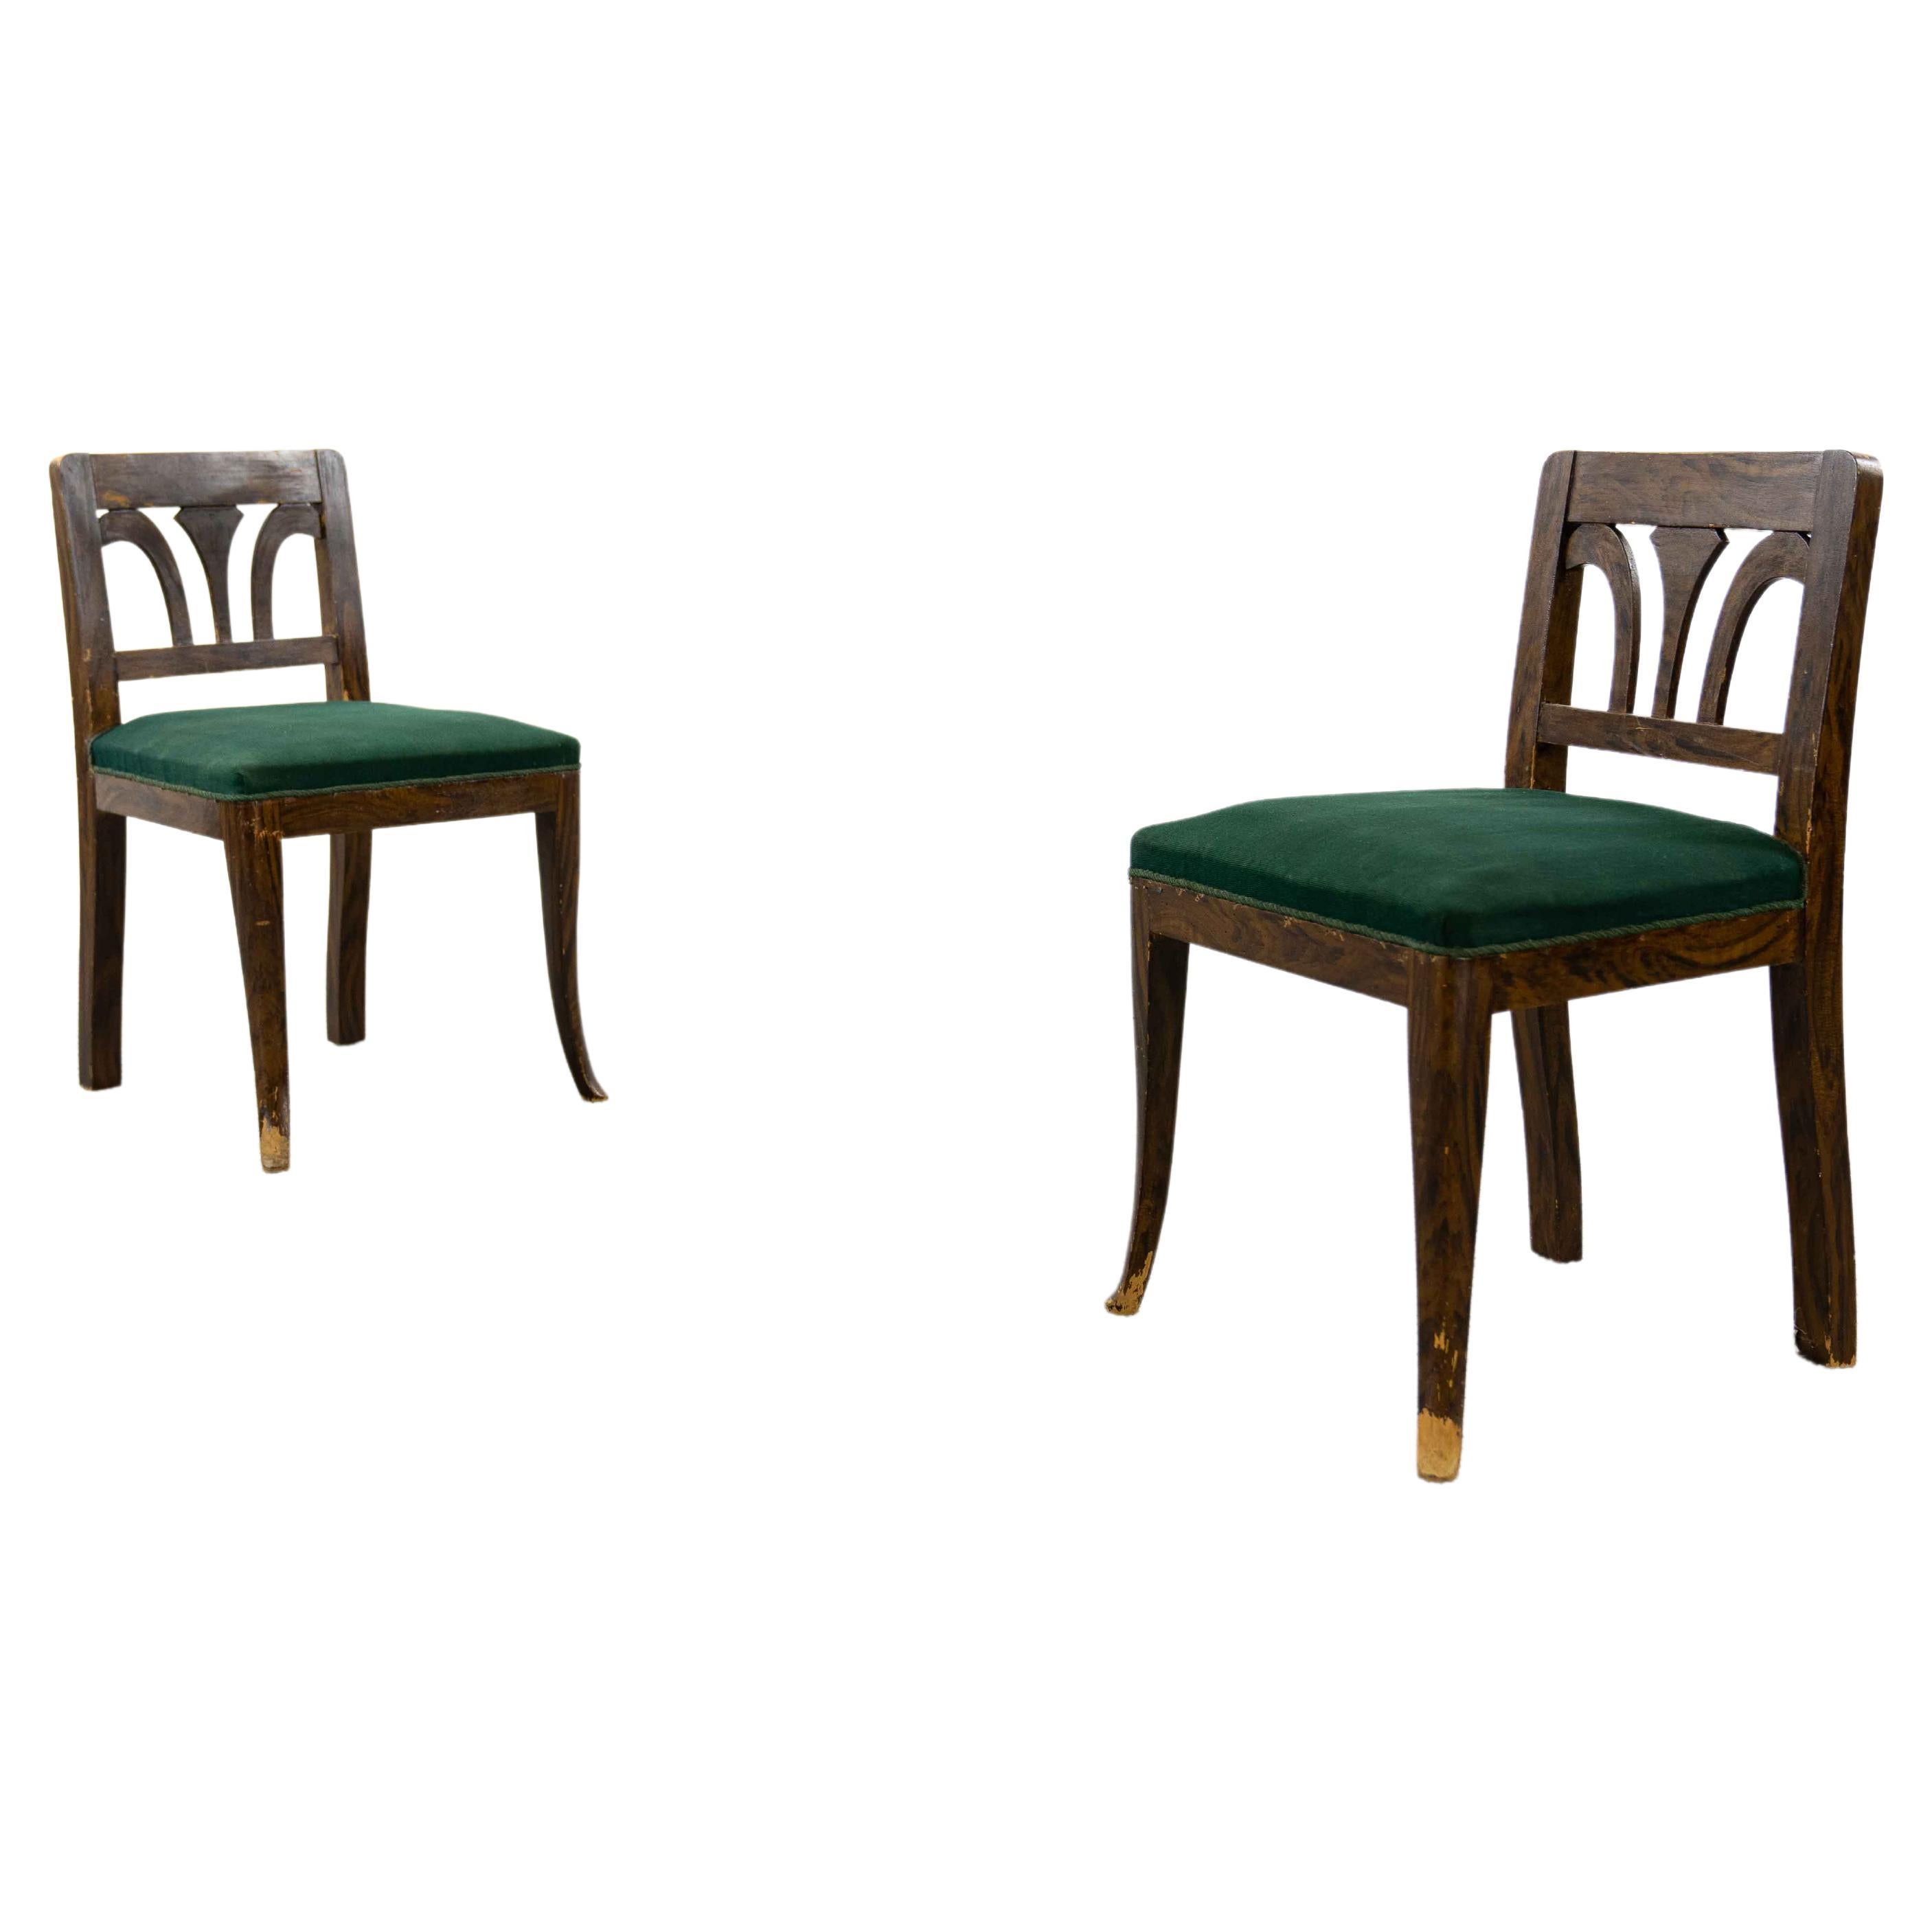 Pair of rural Biedermeier chairs, Germany ca. mid 19 century. The chairs are definitely in need of restoration, but still charming. The chairs appear quite small, but they are no kids chairs. - please compare to the Eames chair. These chairs are